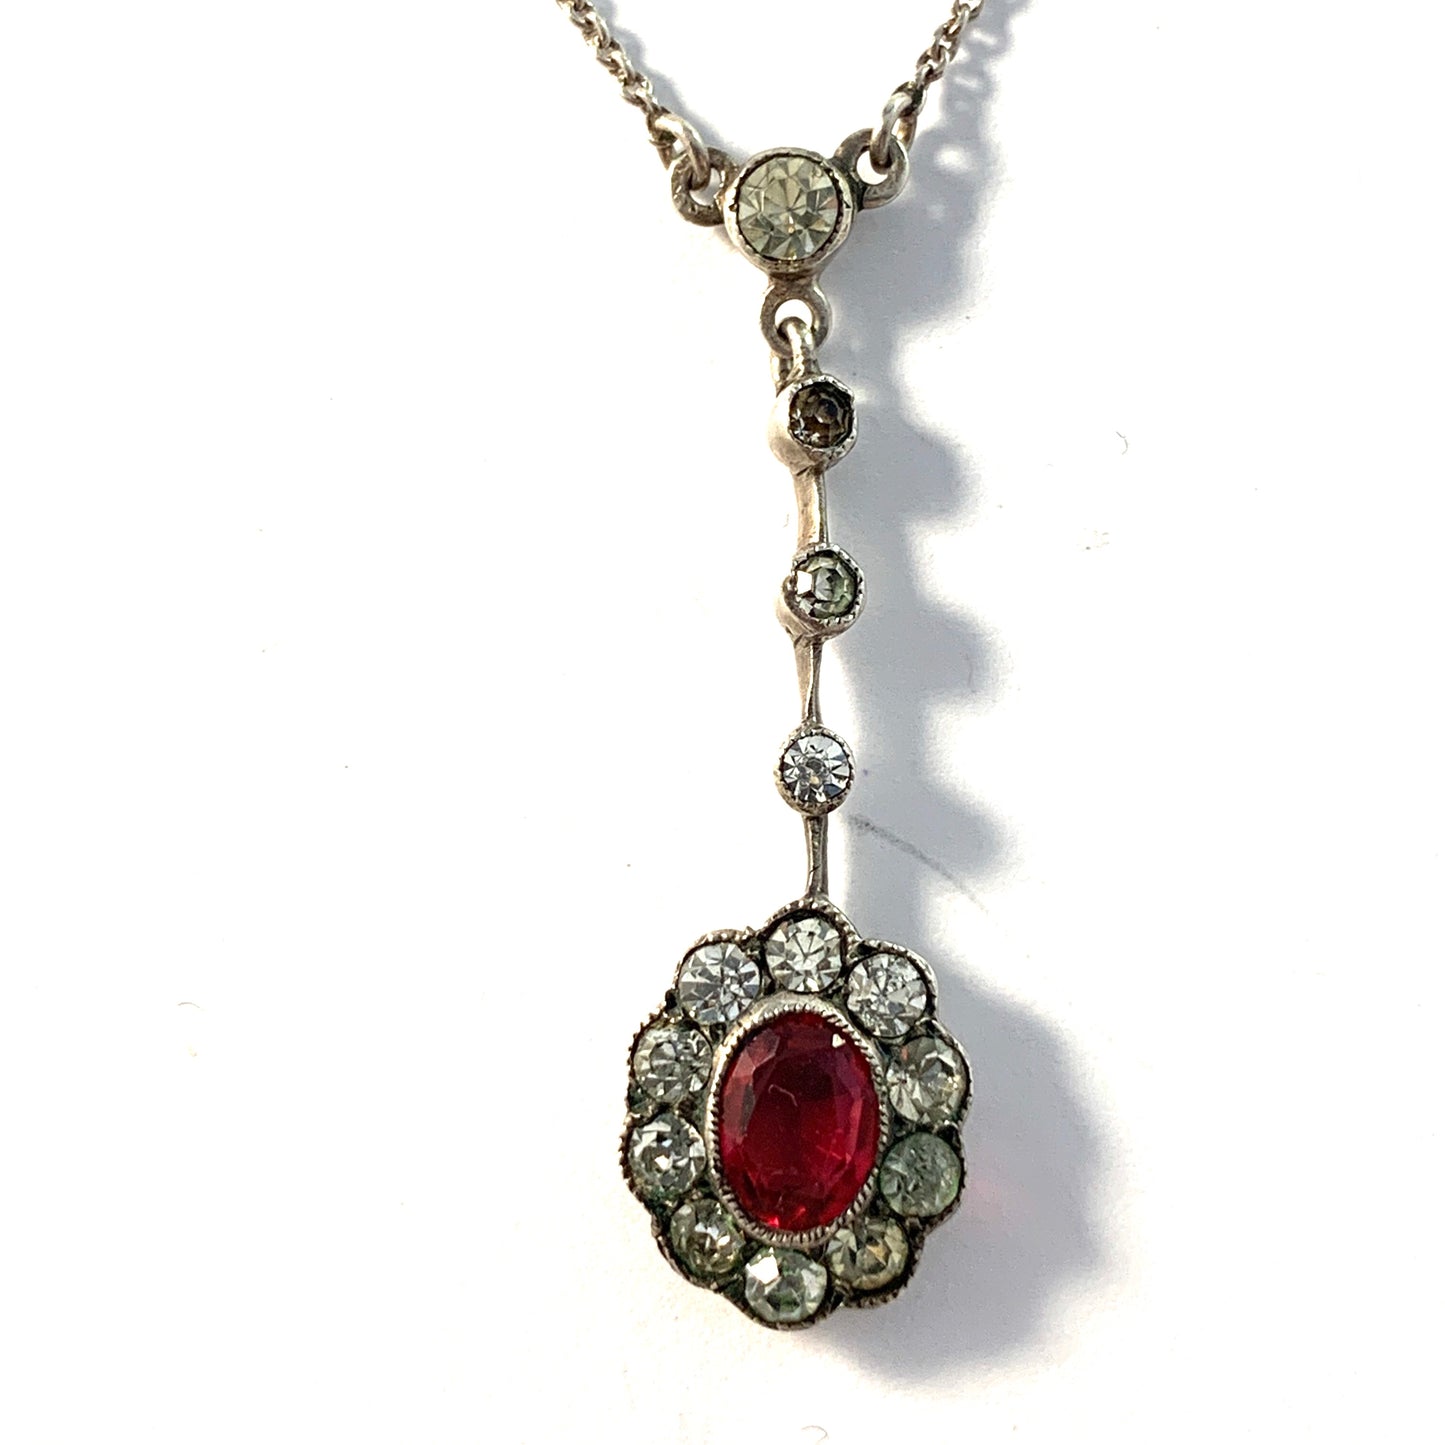 Continental Europe early 1900s. Antique Silver Paste Pendant Necklace.